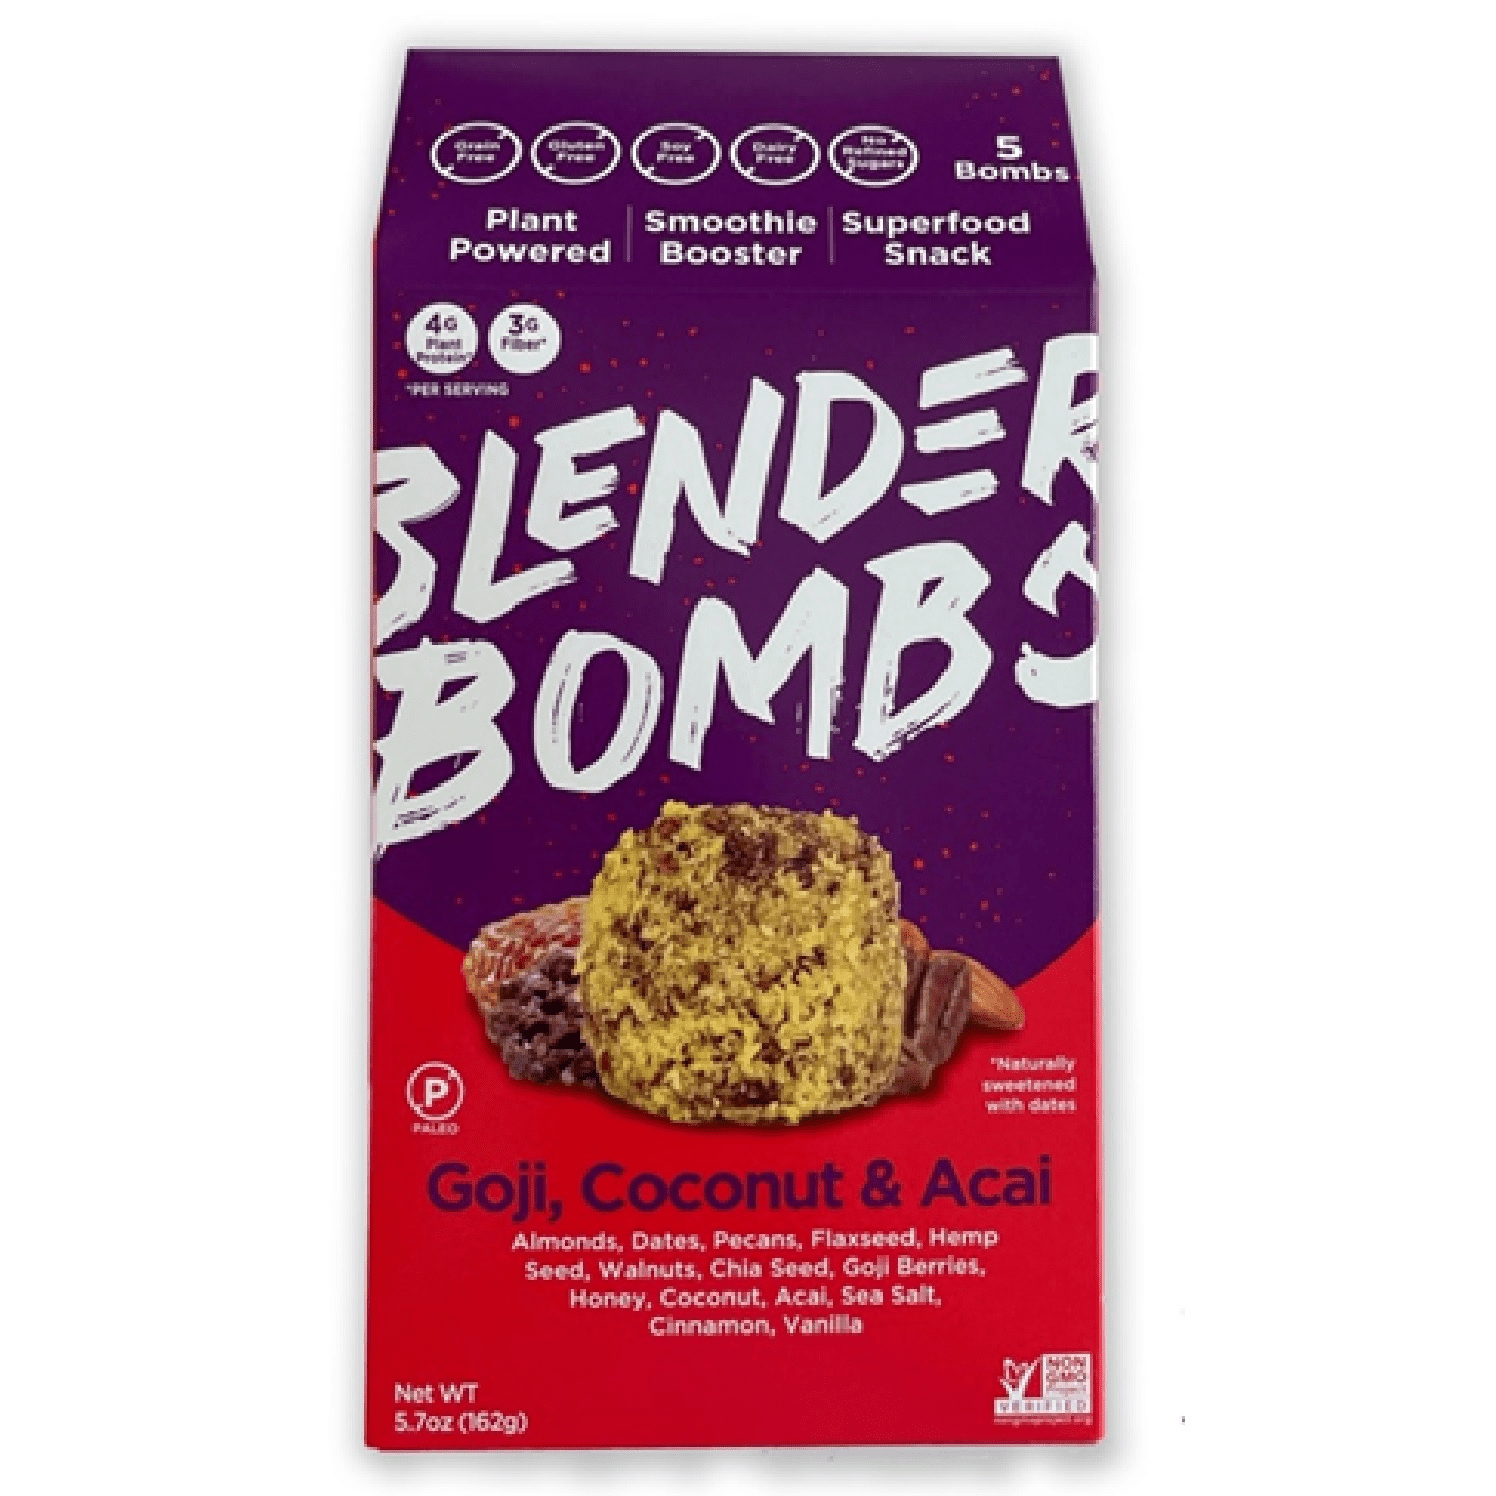 I ate a Blender Bomb Everyday for 30 Days and This is What